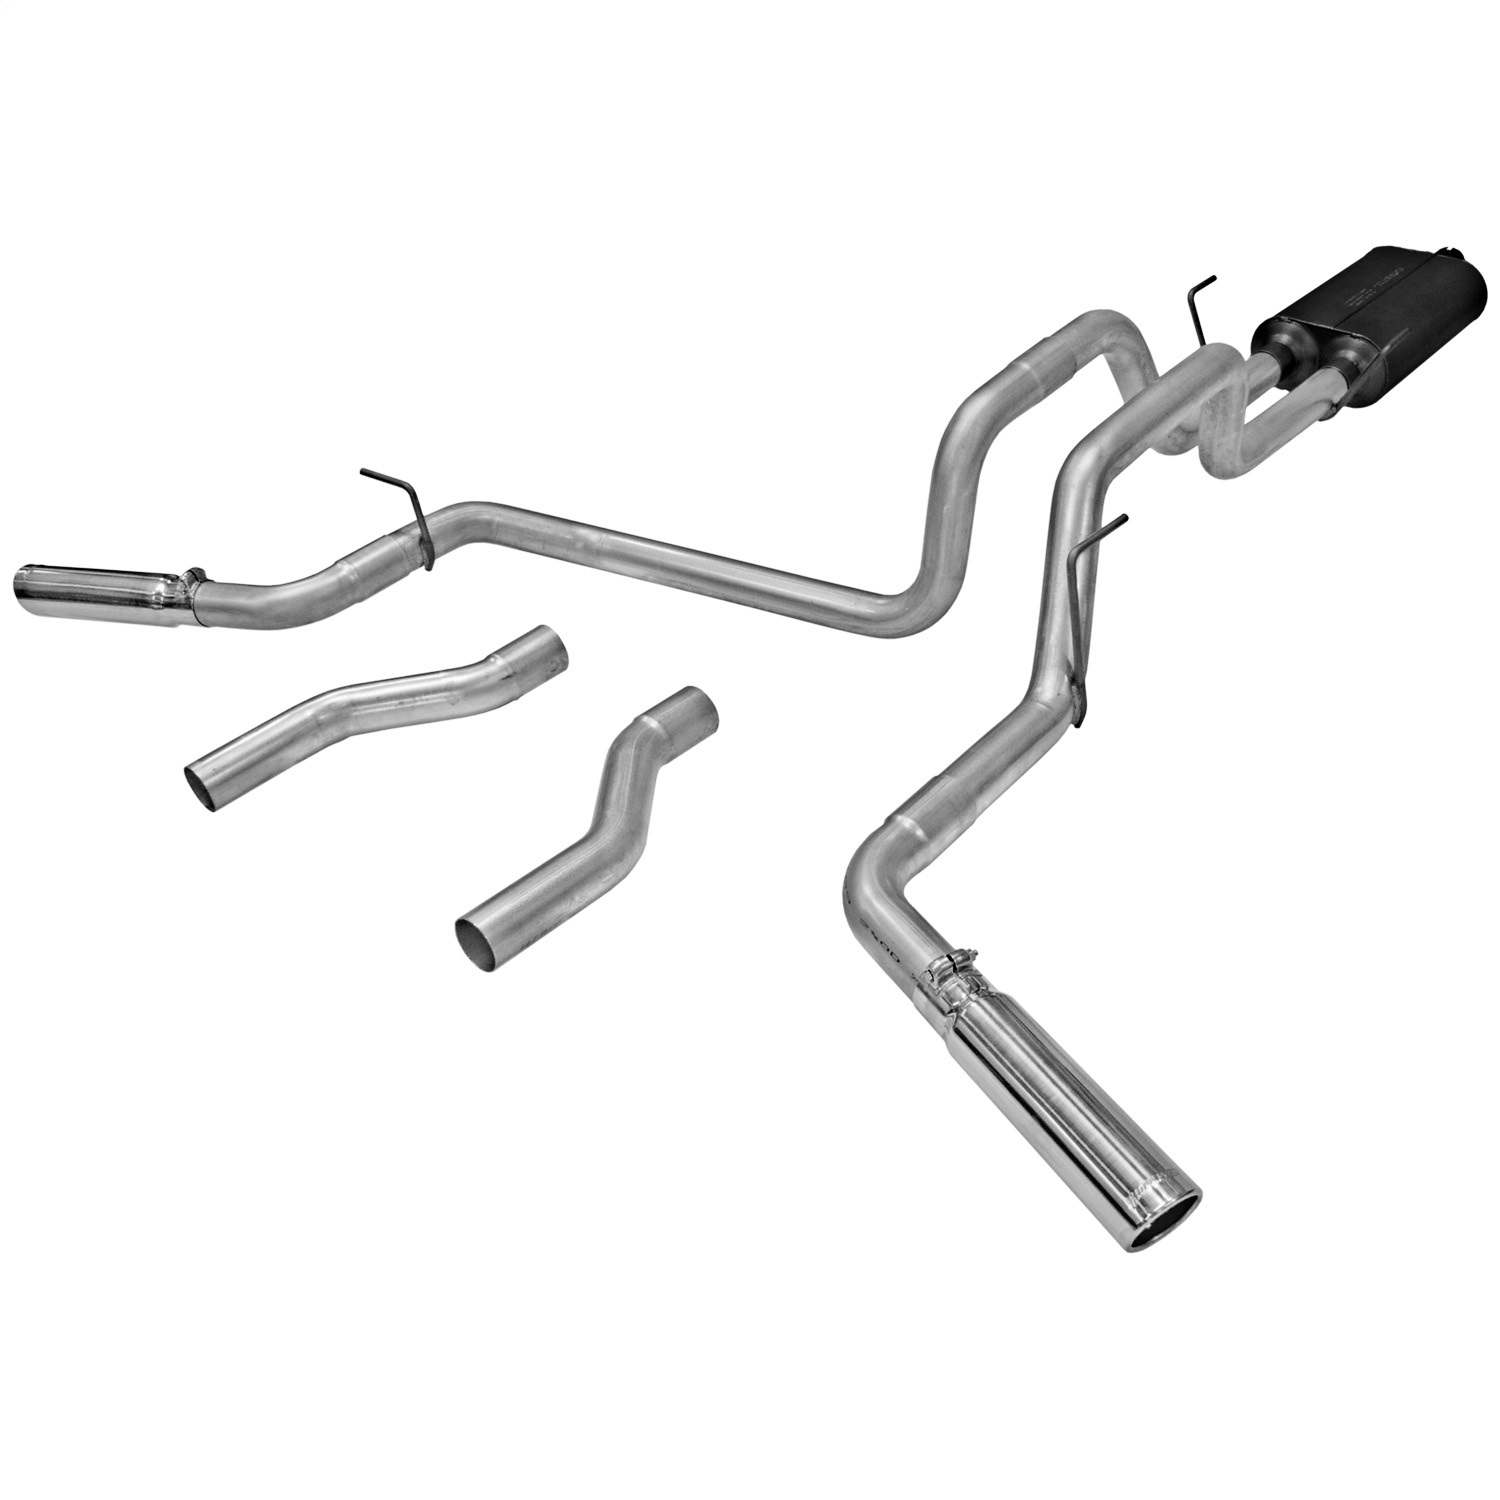 Flowmaster Flowmaster 817476 American Thunder Cat Back Exhaust System Fits 02-05 Ram 1500